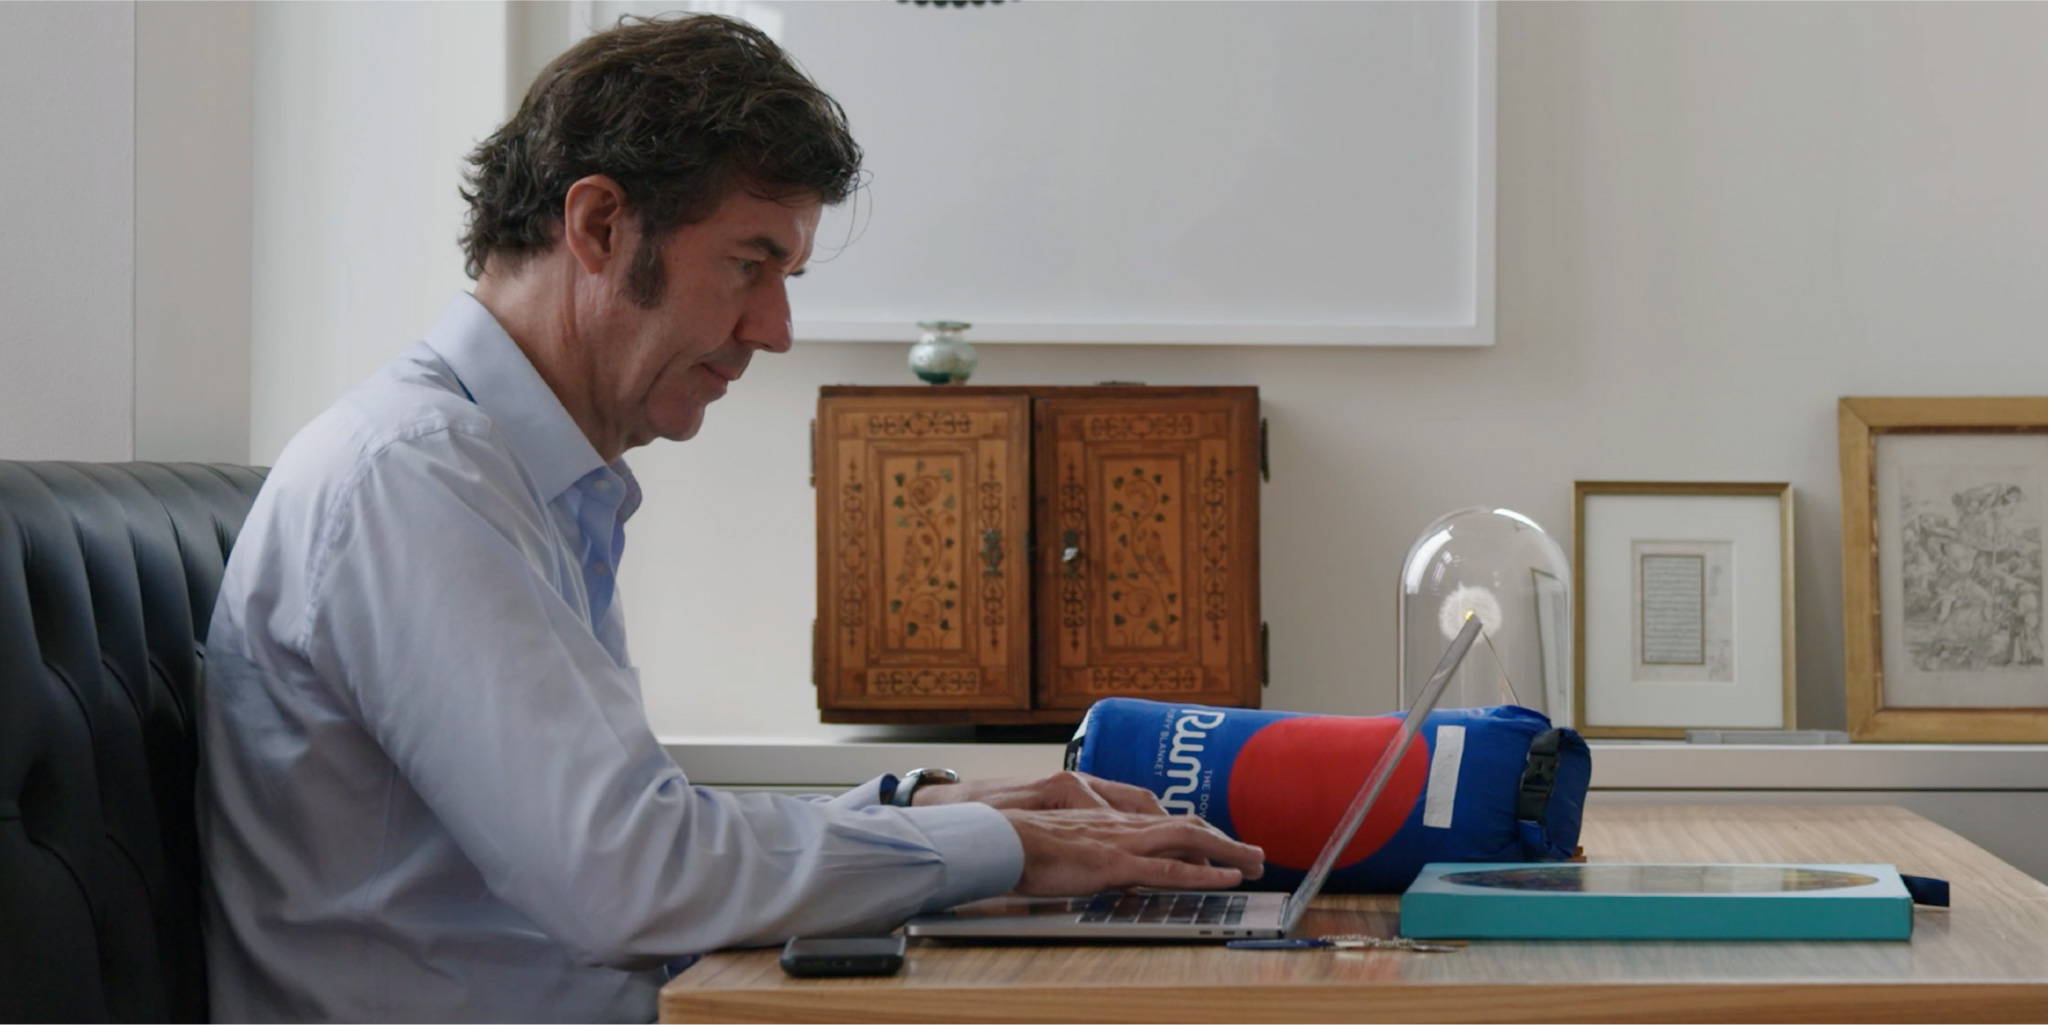 Stefan Sagmeister sitting at his computer with a Rumpl blanket